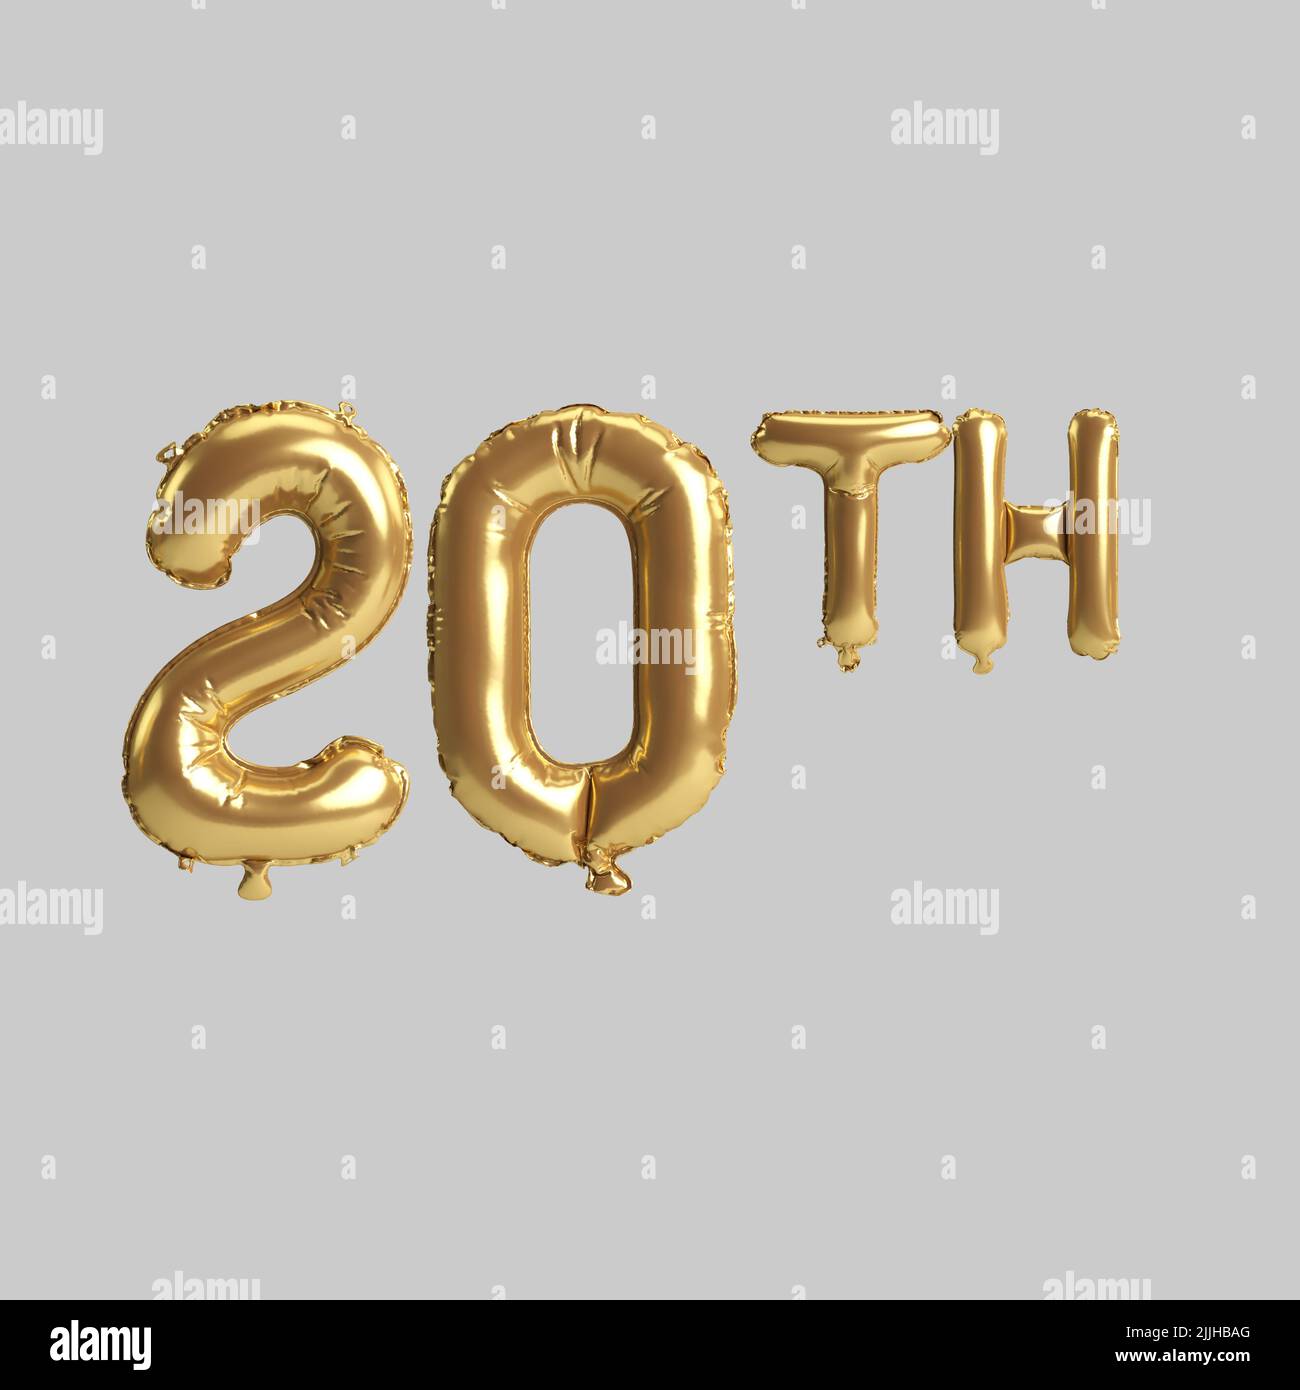 3d illustration of 20th gold balloons isolated on background Stock Photo